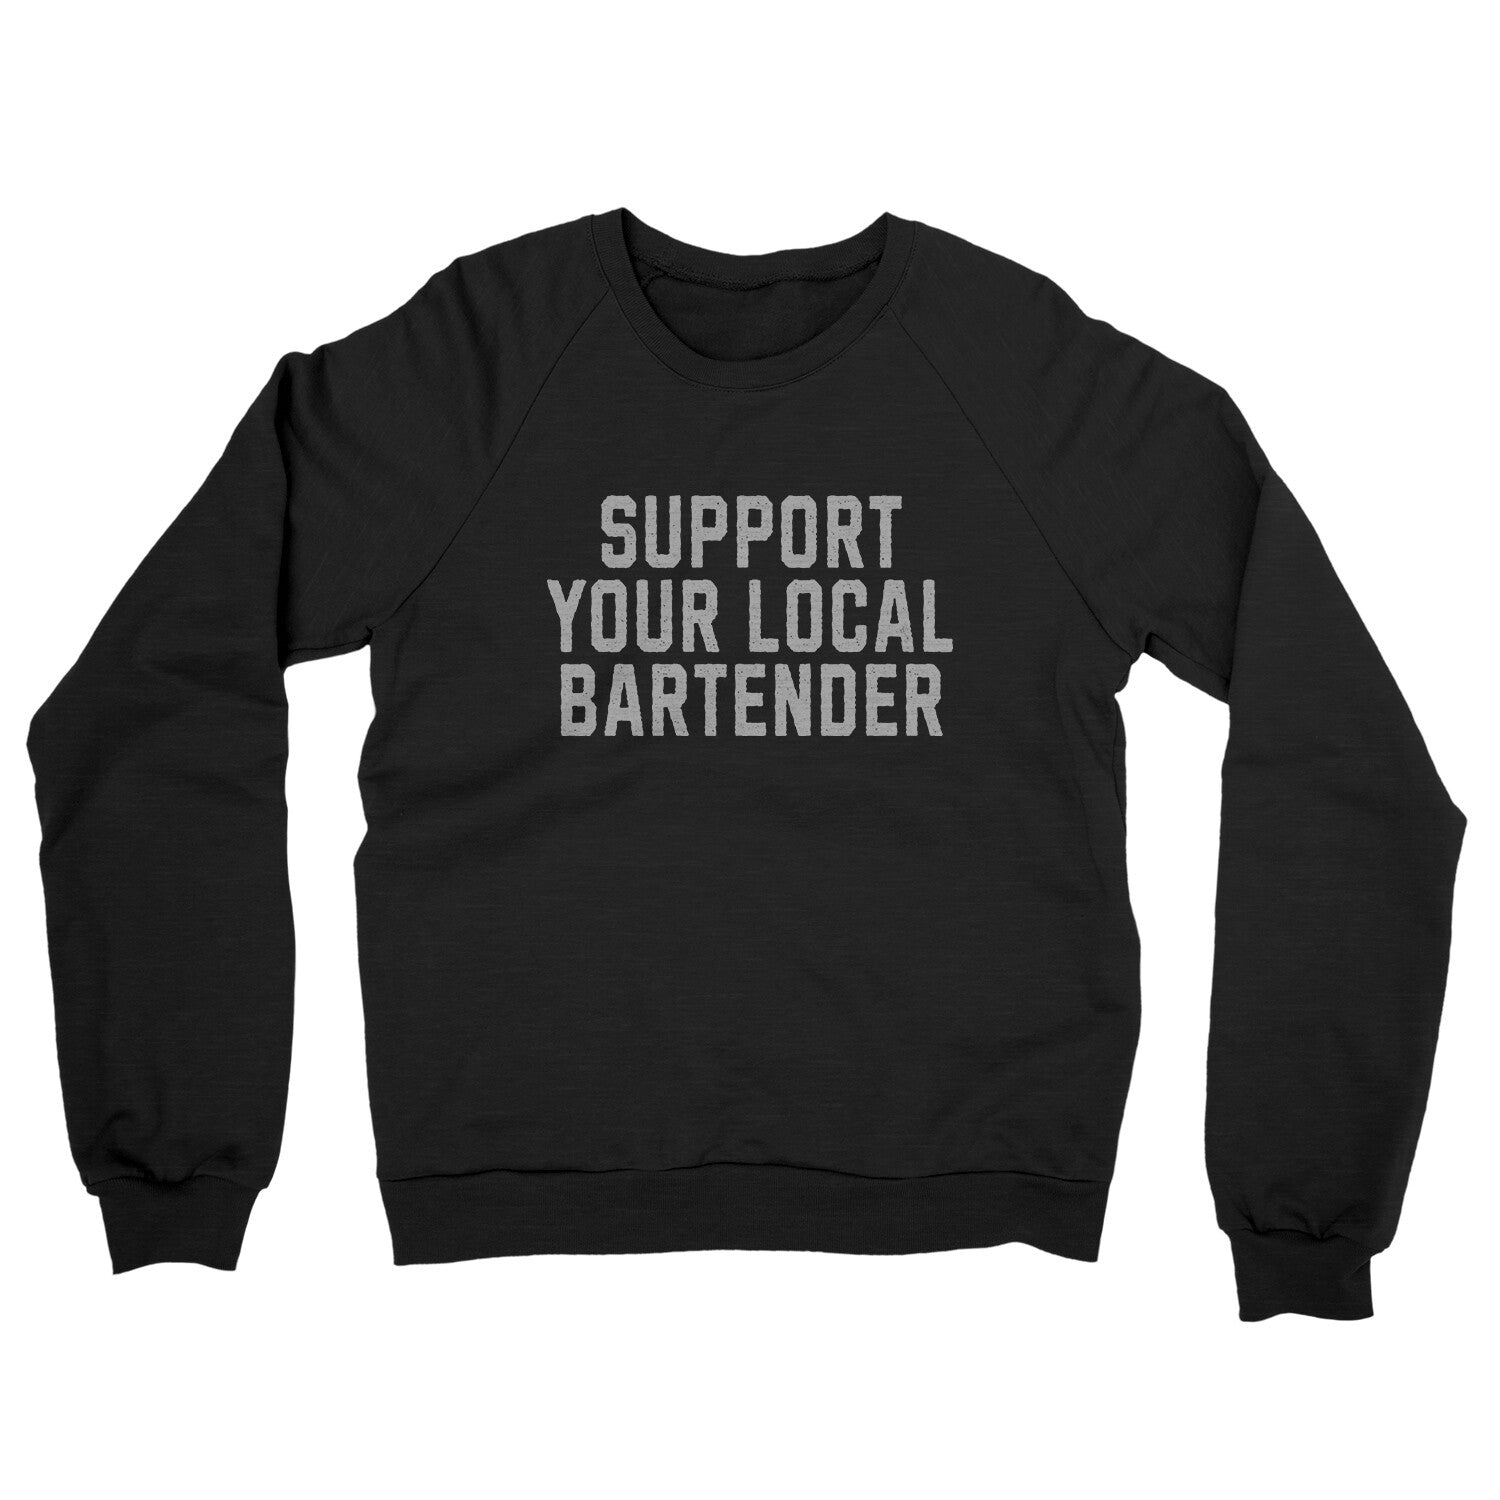 Support your Local Bartender in Black Color